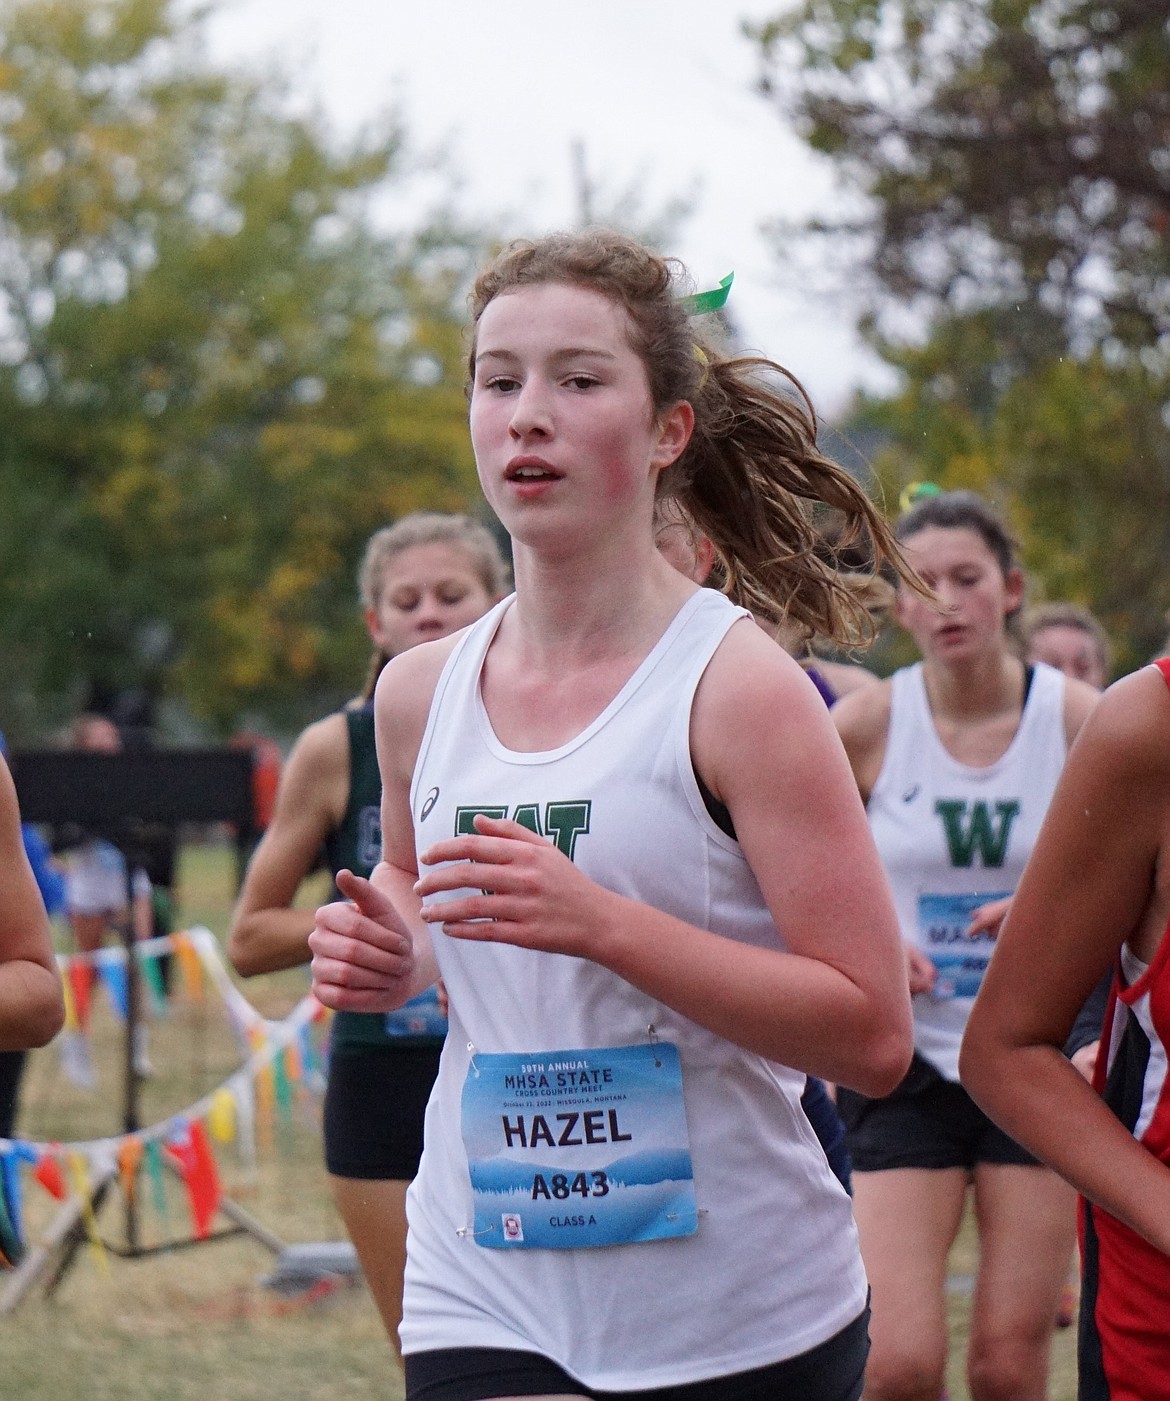 Junior Hazel Gawe pictured at the one-mile mark during the MHSA State Championship in Missoula. (Photo courtesy Matt Weller)